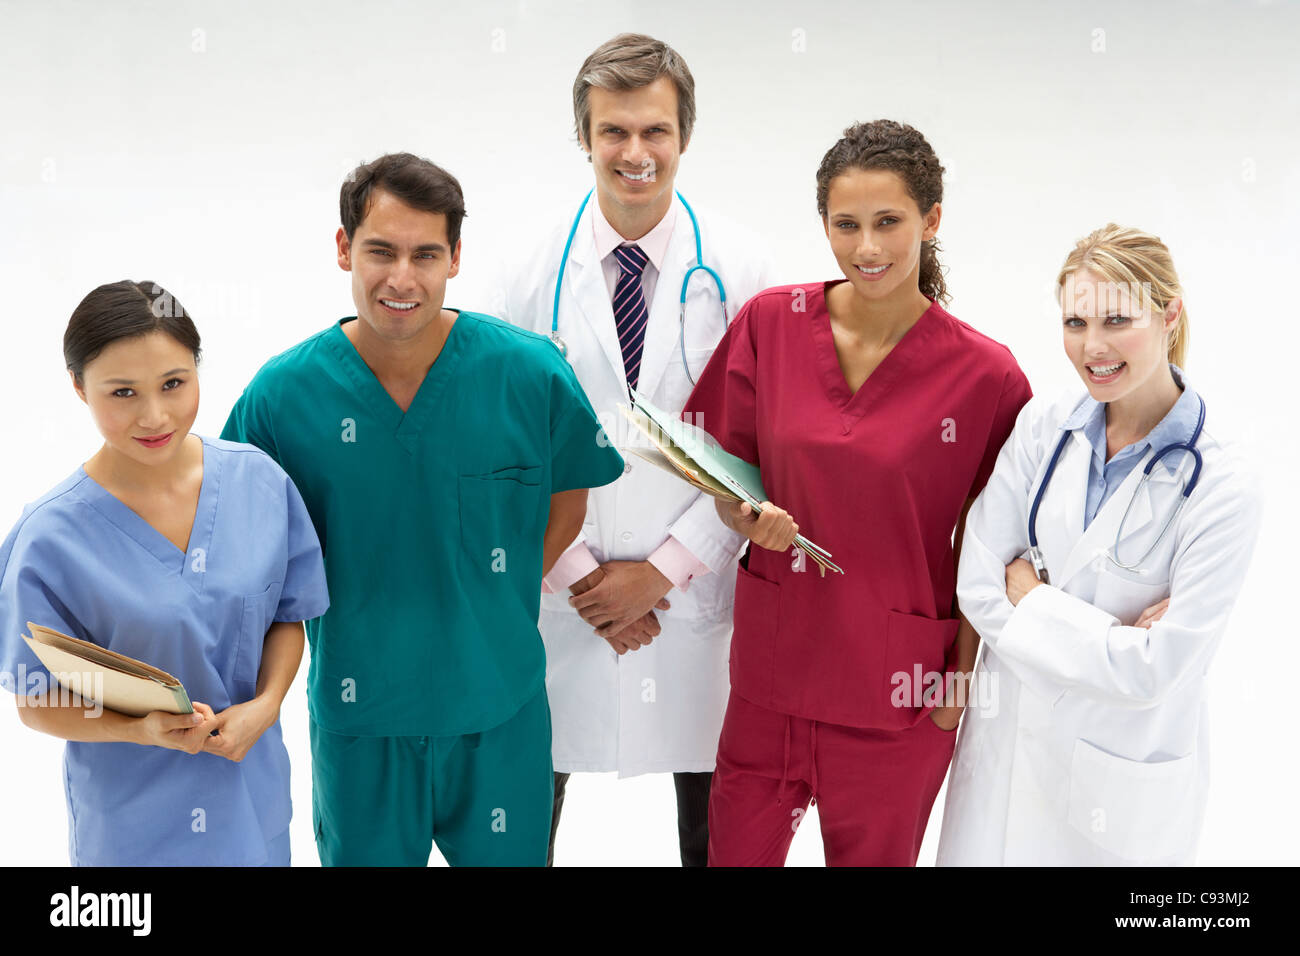 Group of medical professionals Stock Photo